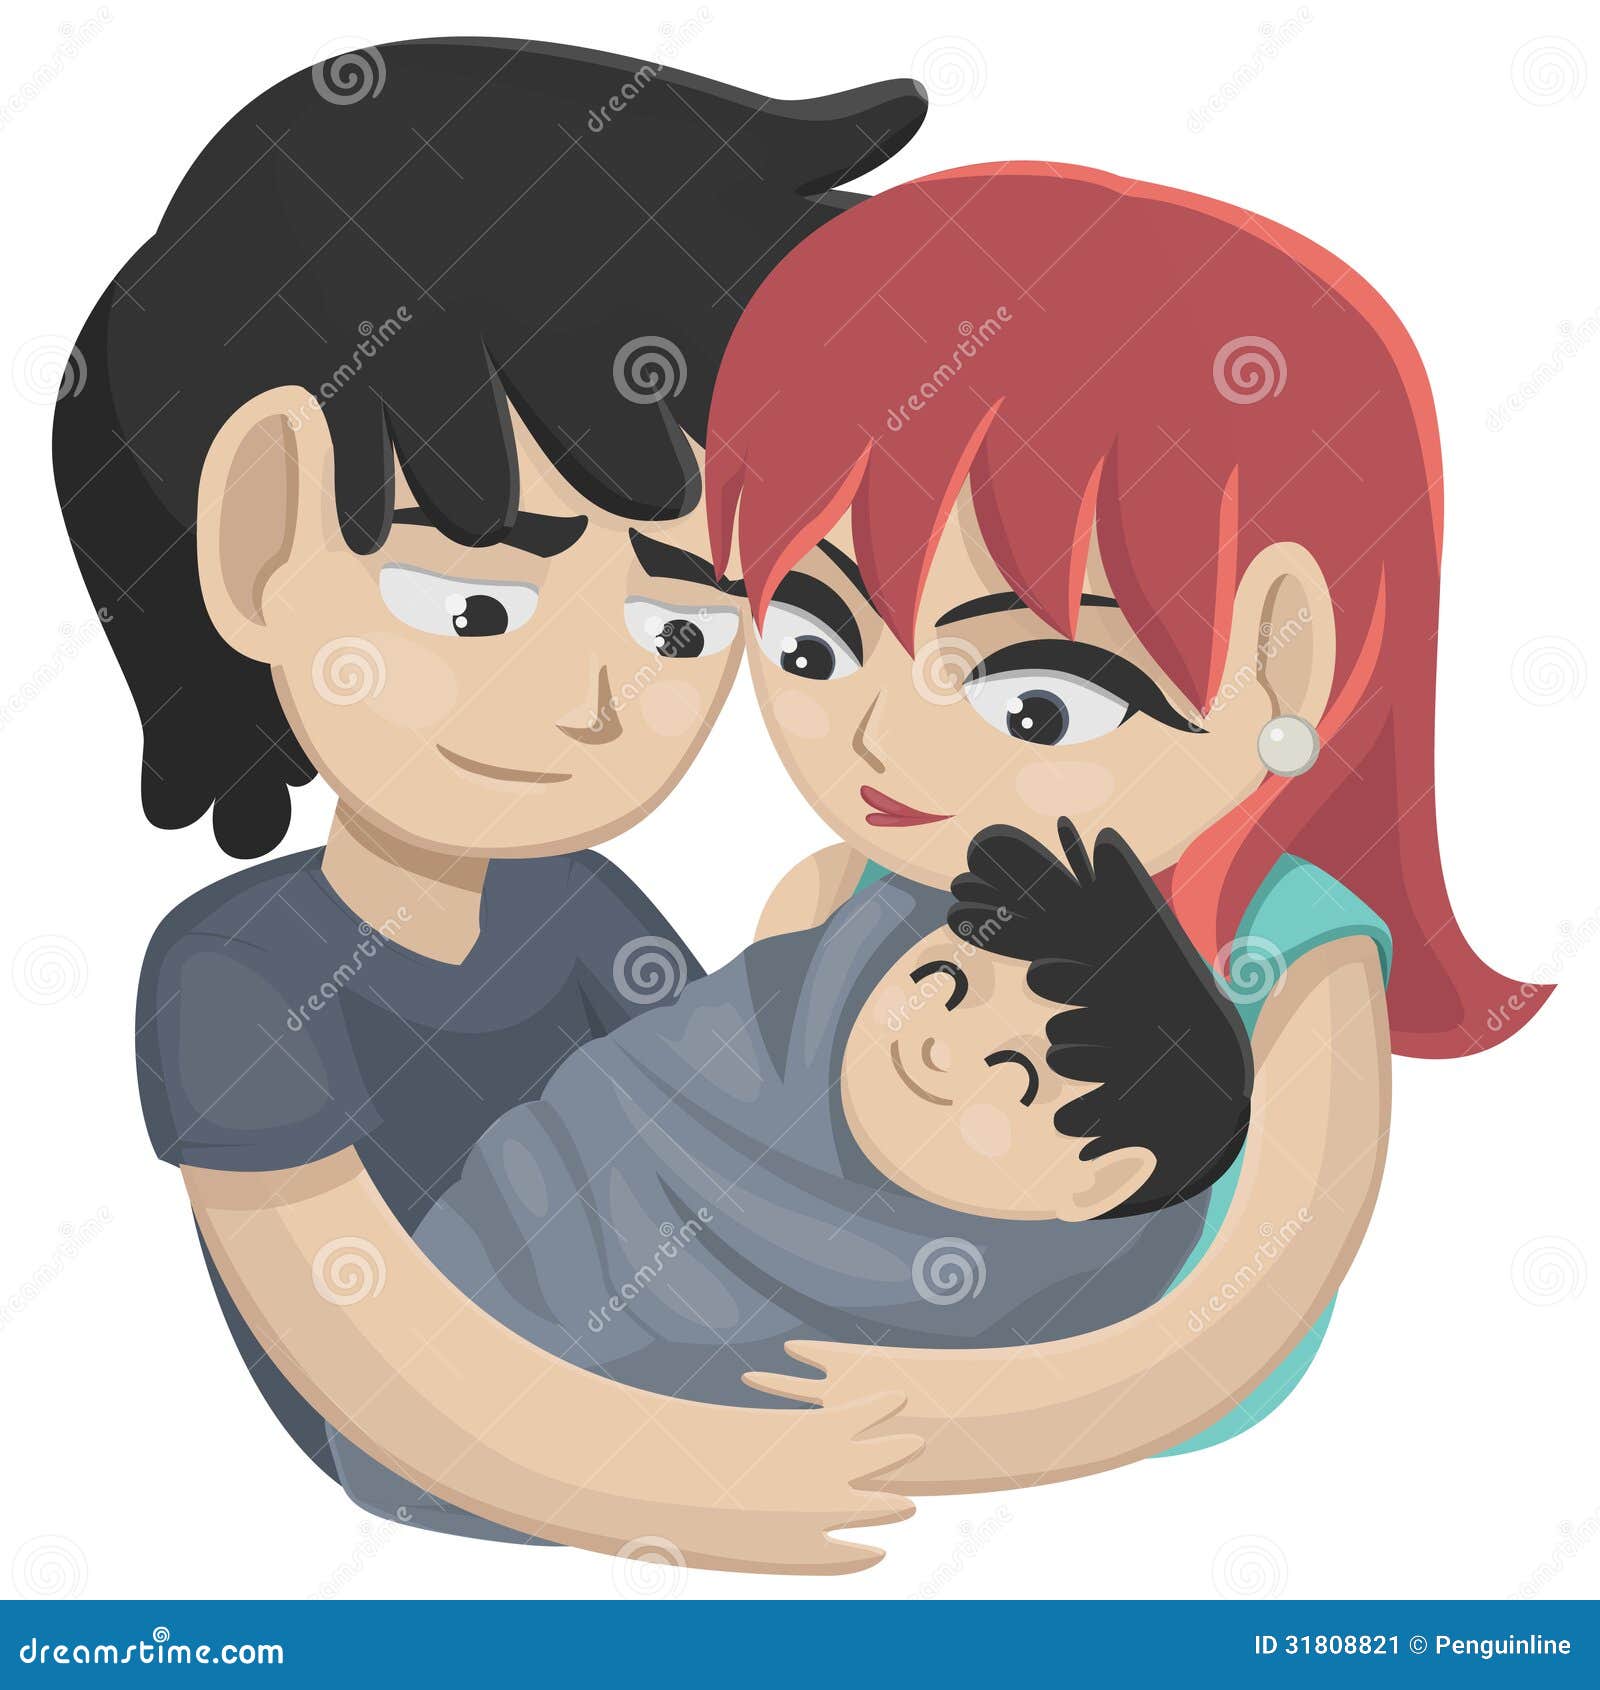 clipart of a happy couple - photo #41